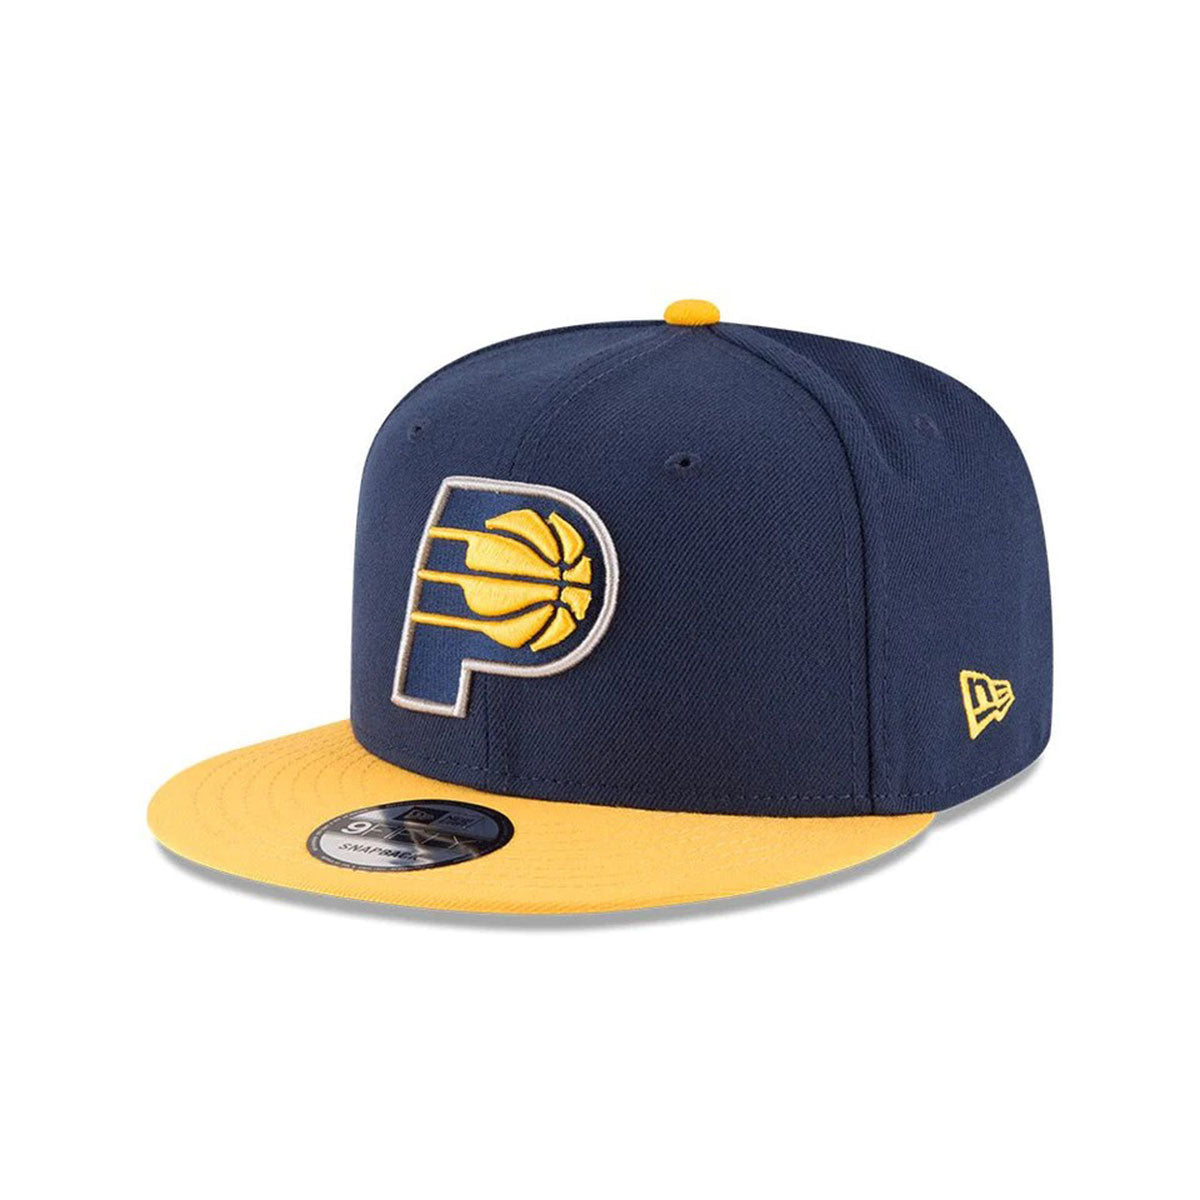 NEW ERA Indiana Pacers - 9FIFTY INDIANA PACERS NAVY/YELLOW【13552034】